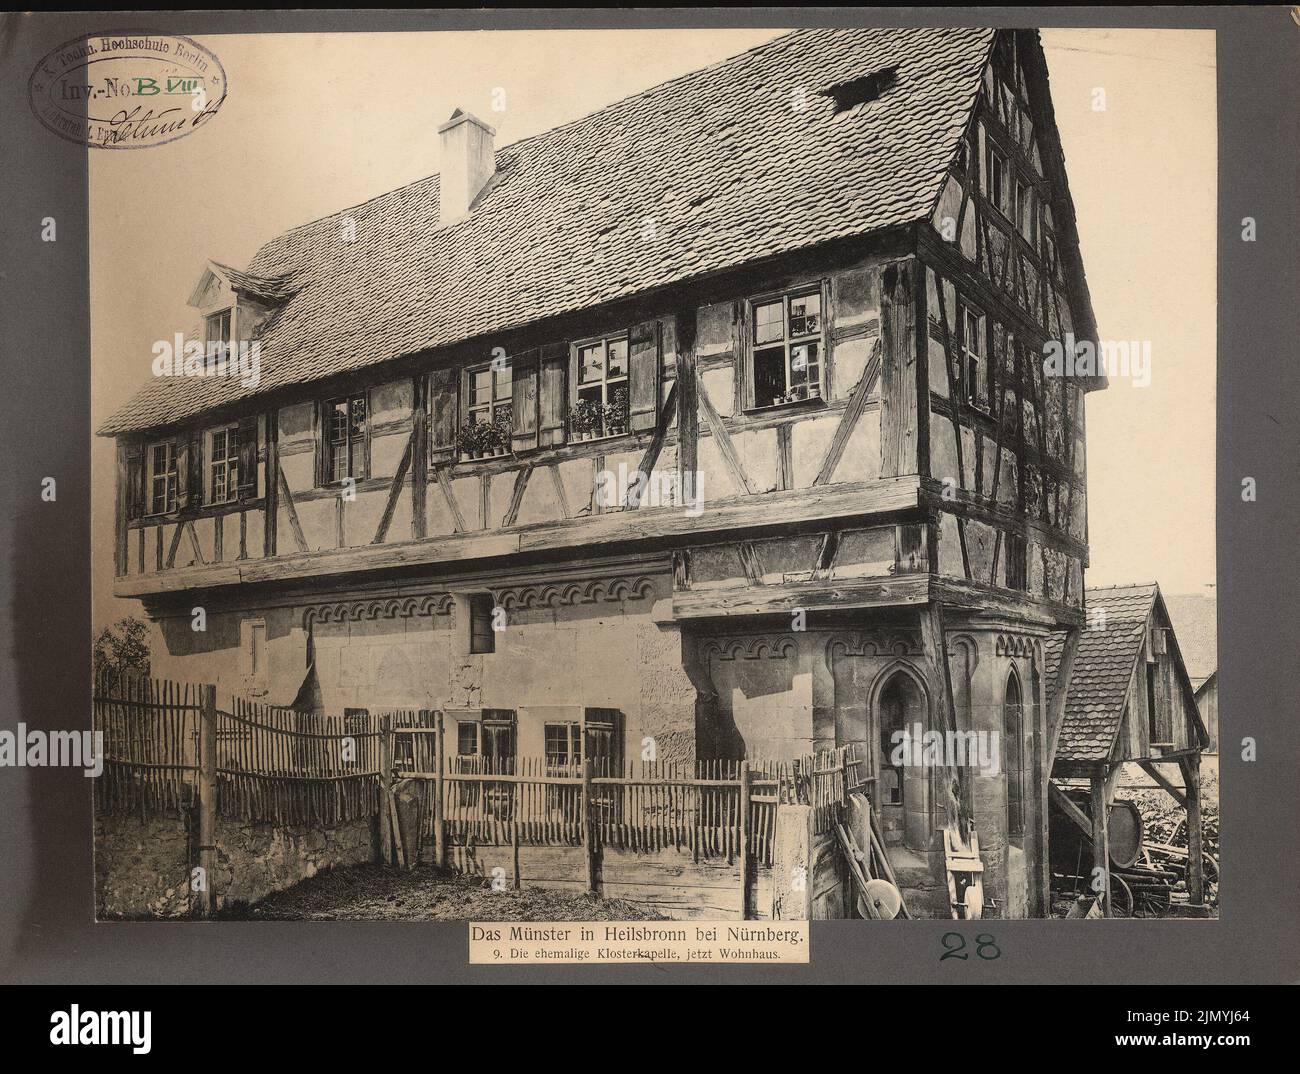 Unknown photographer, former monastery chapel (now house), Heilsbronn (without dat.): View half -timbered house, formerly belonging to the Münster. Photo, 23.9 x 31.6 cm (including scan edges) Stock Photo